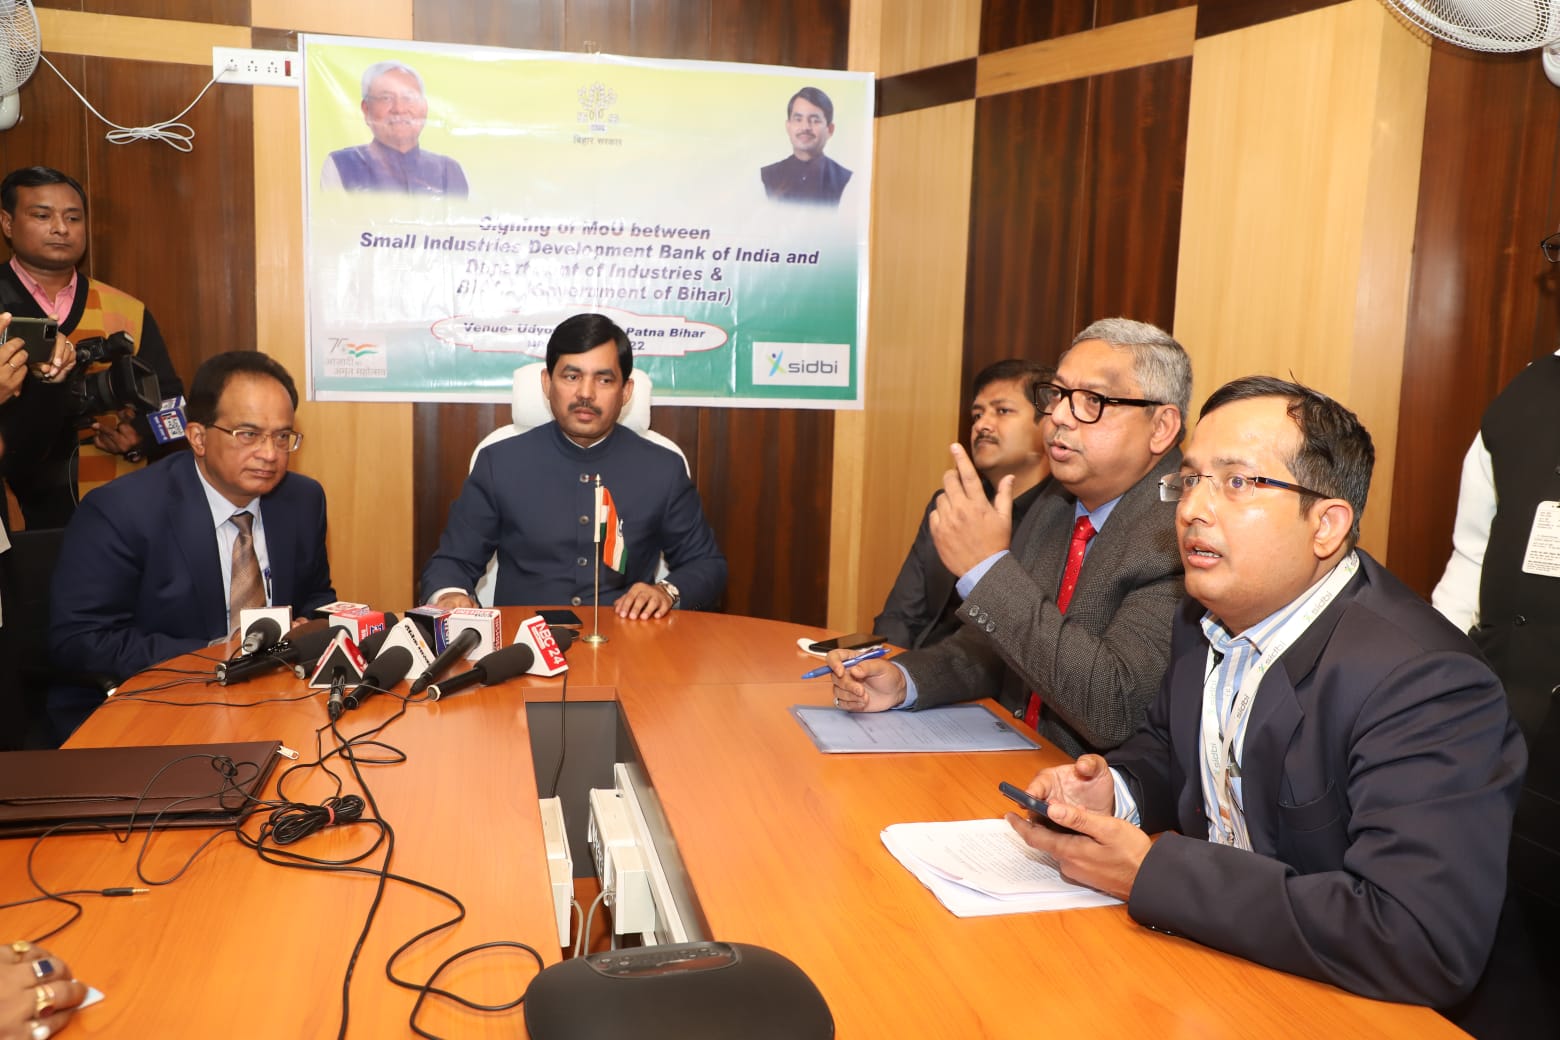 sidbi-joins-hands-with-government-of-bihar-for-the-development-of-msme-ecosystem-in-the-state